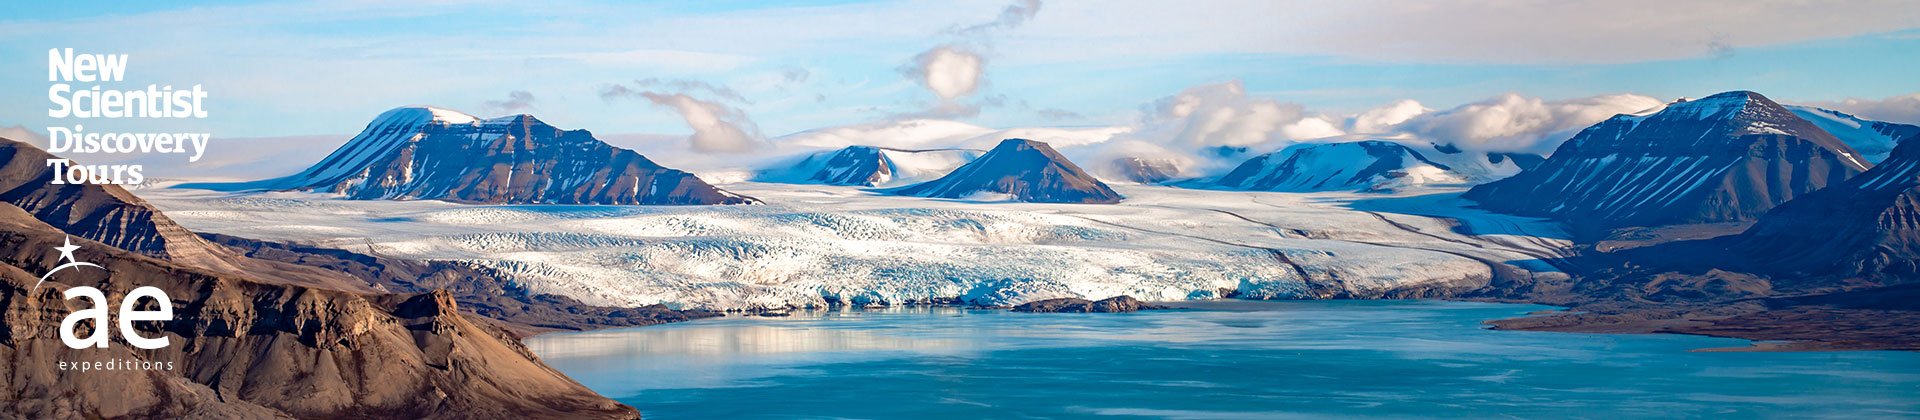 New Scientist & AE Expeditions Svalbard